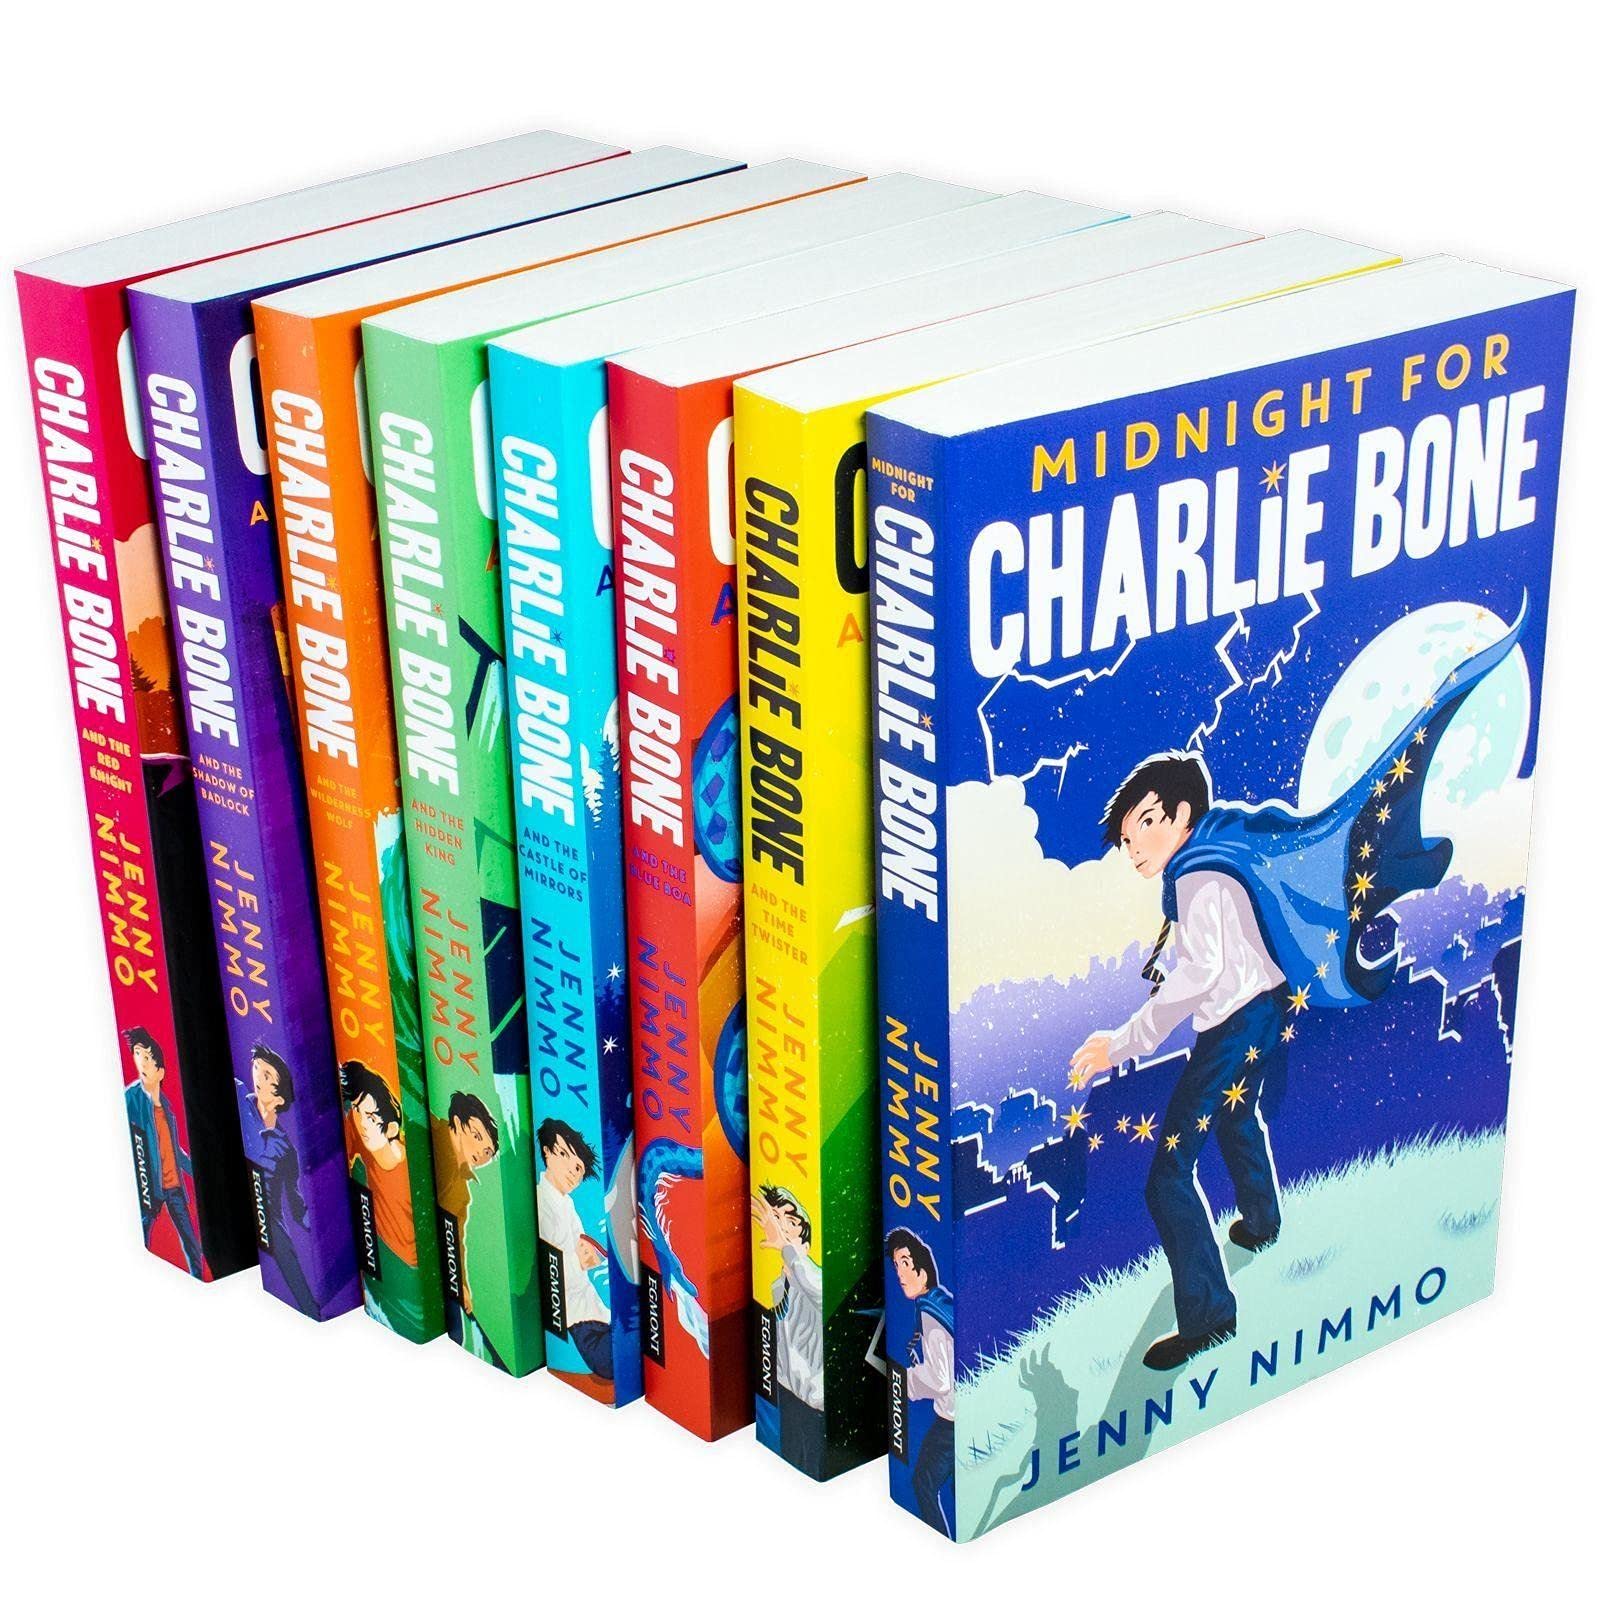 Jenny Nimmo's Charlie Bone 8-Books Collection Midnight for Charlie Bone ( Blue Boa ) - Lets Buy Books